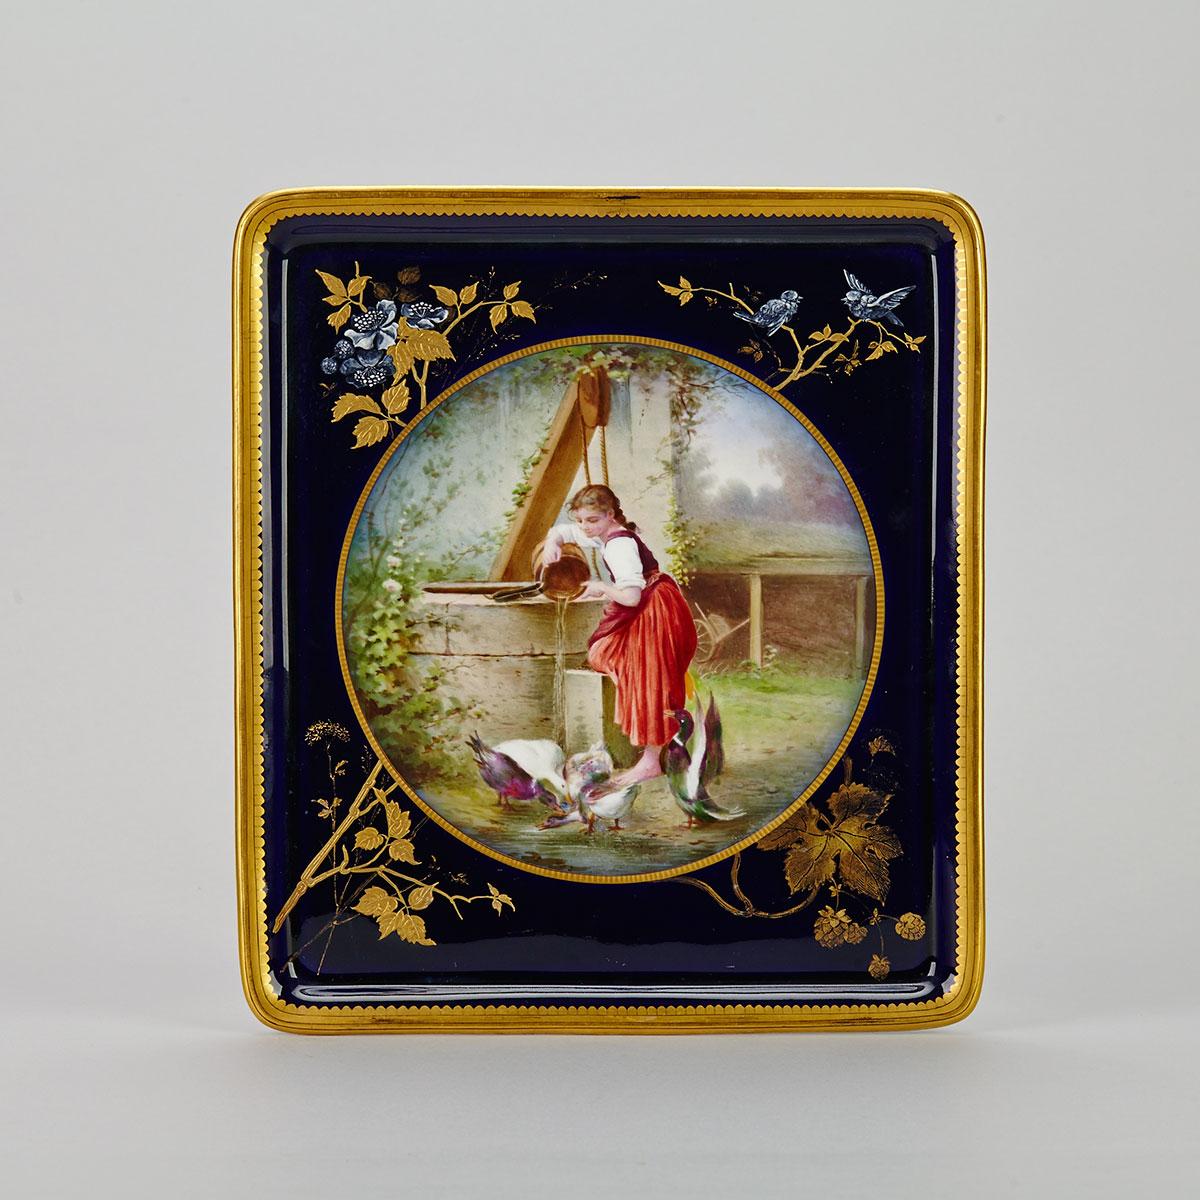 French Porcelain Rectangular Tray, late 19th century